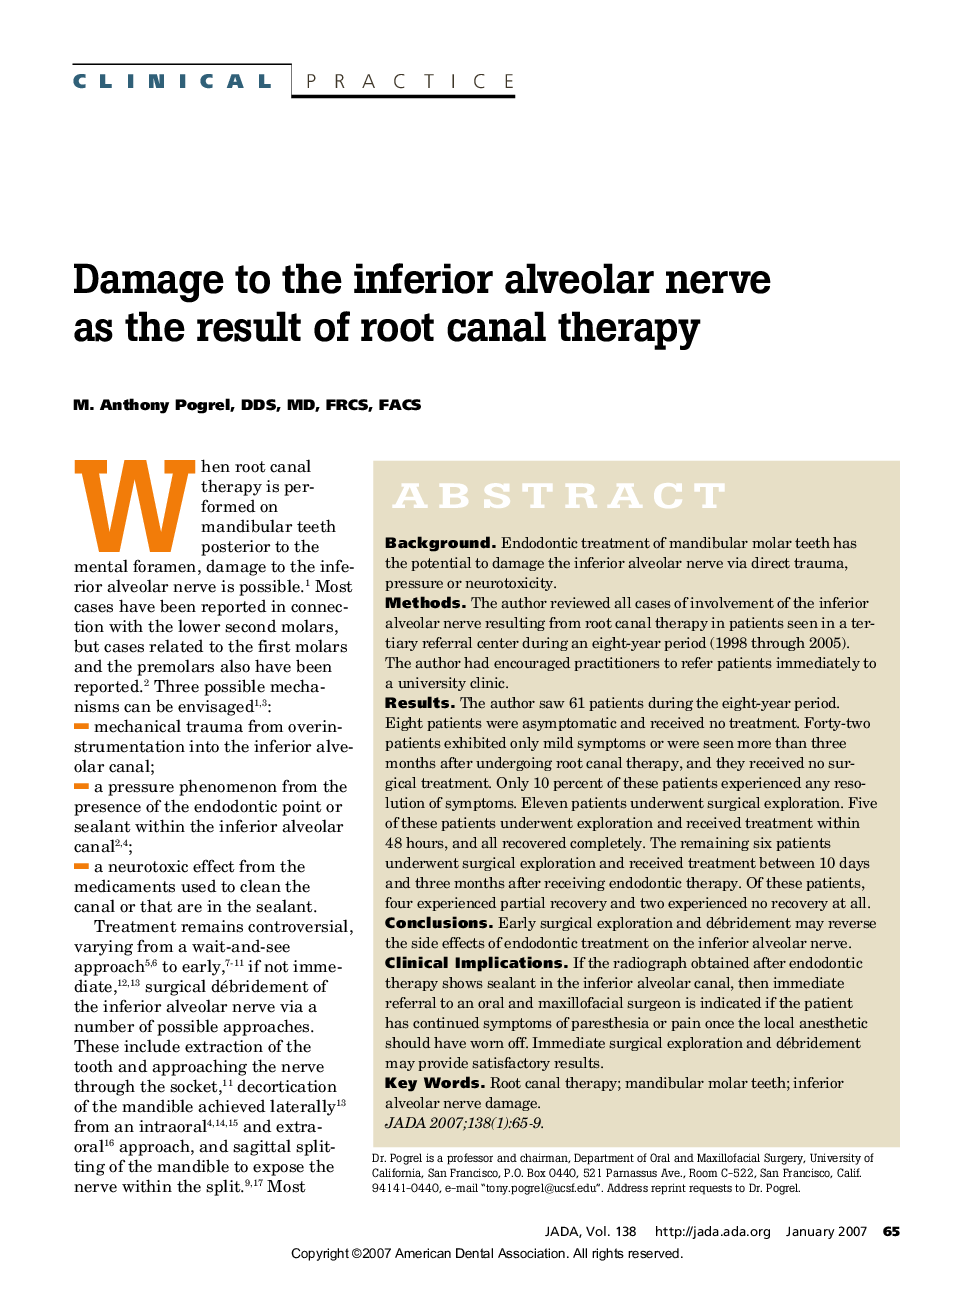 Damage to the inferior alveolar nerve as the result of root canal therapy